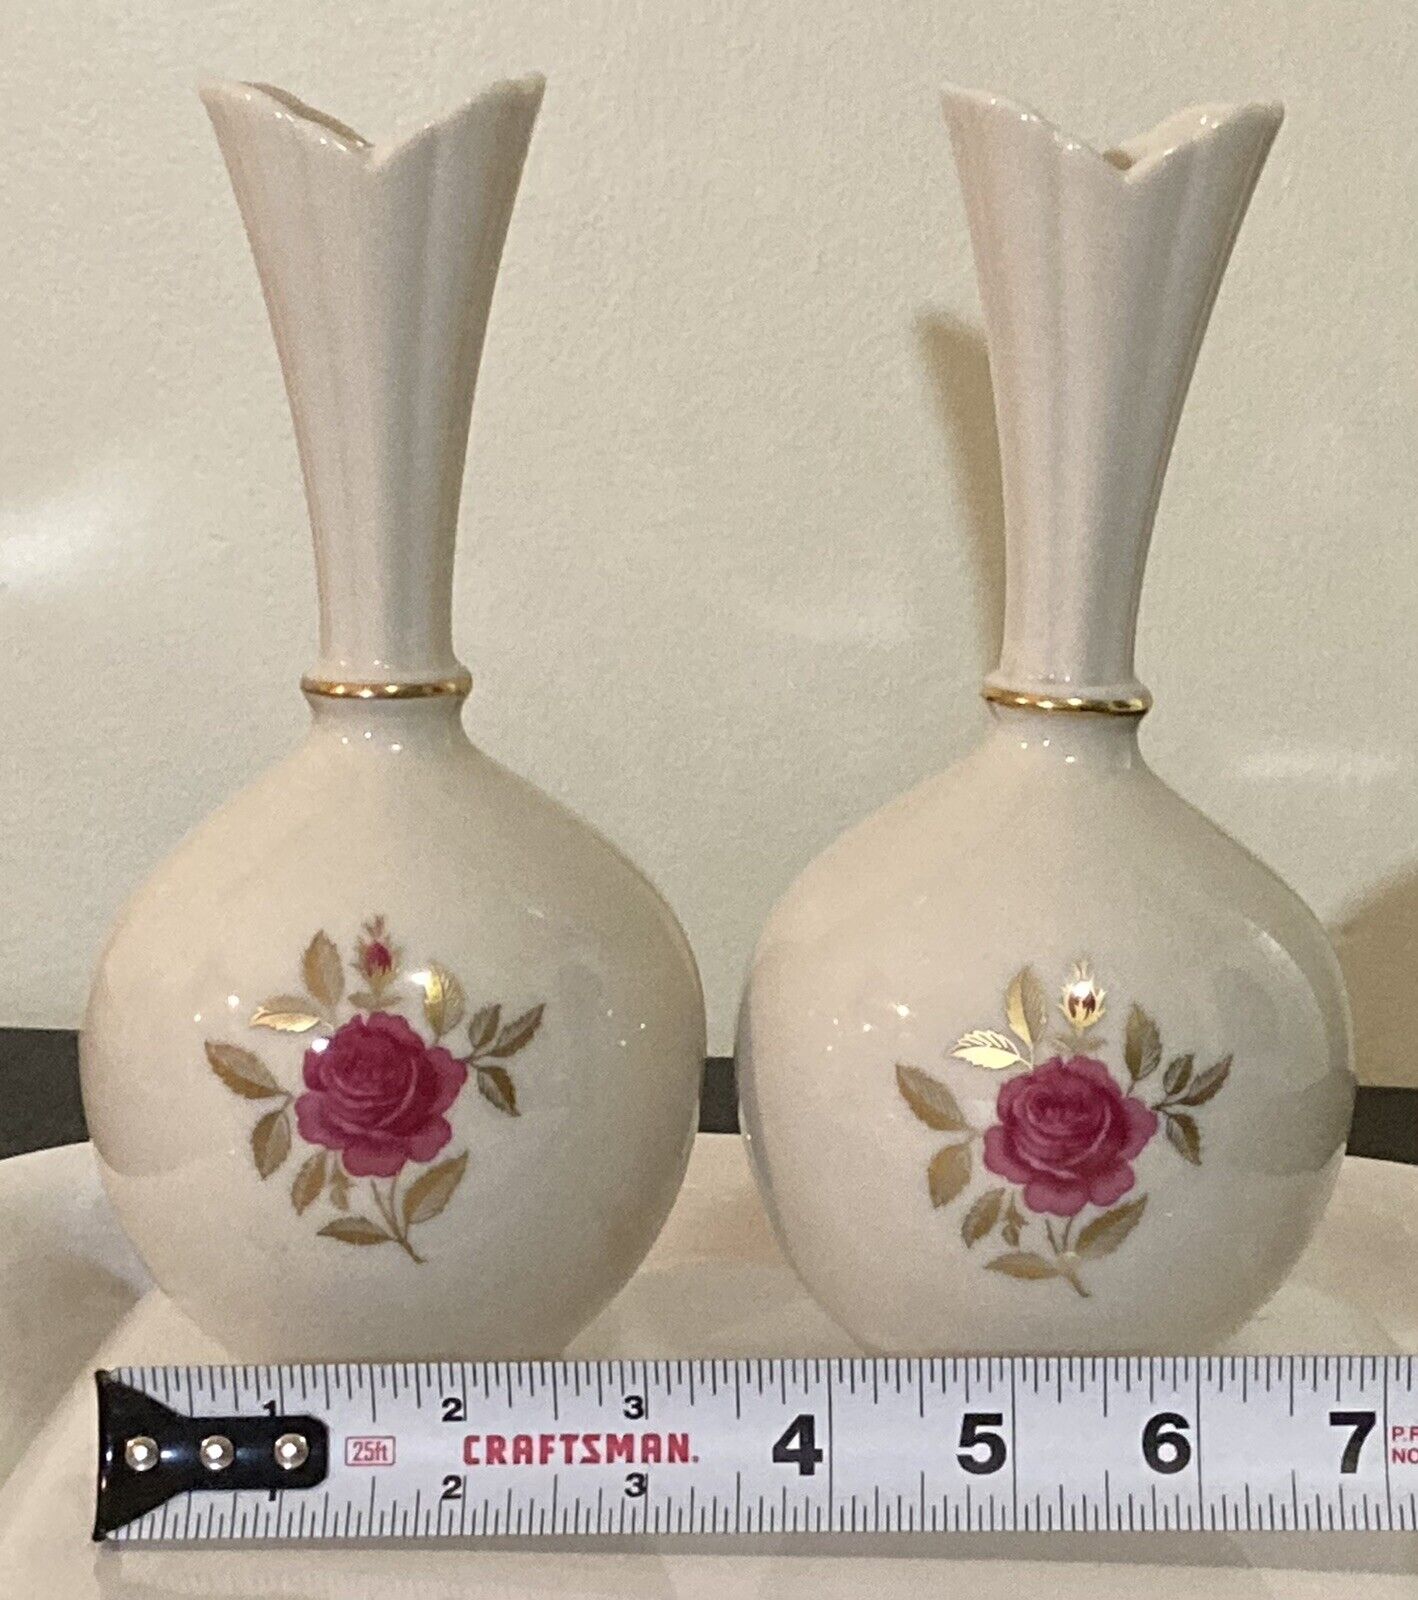 Set of 2 Lenox Red Rose Vases In Perfect Condition. Perfect For DIY Wedding